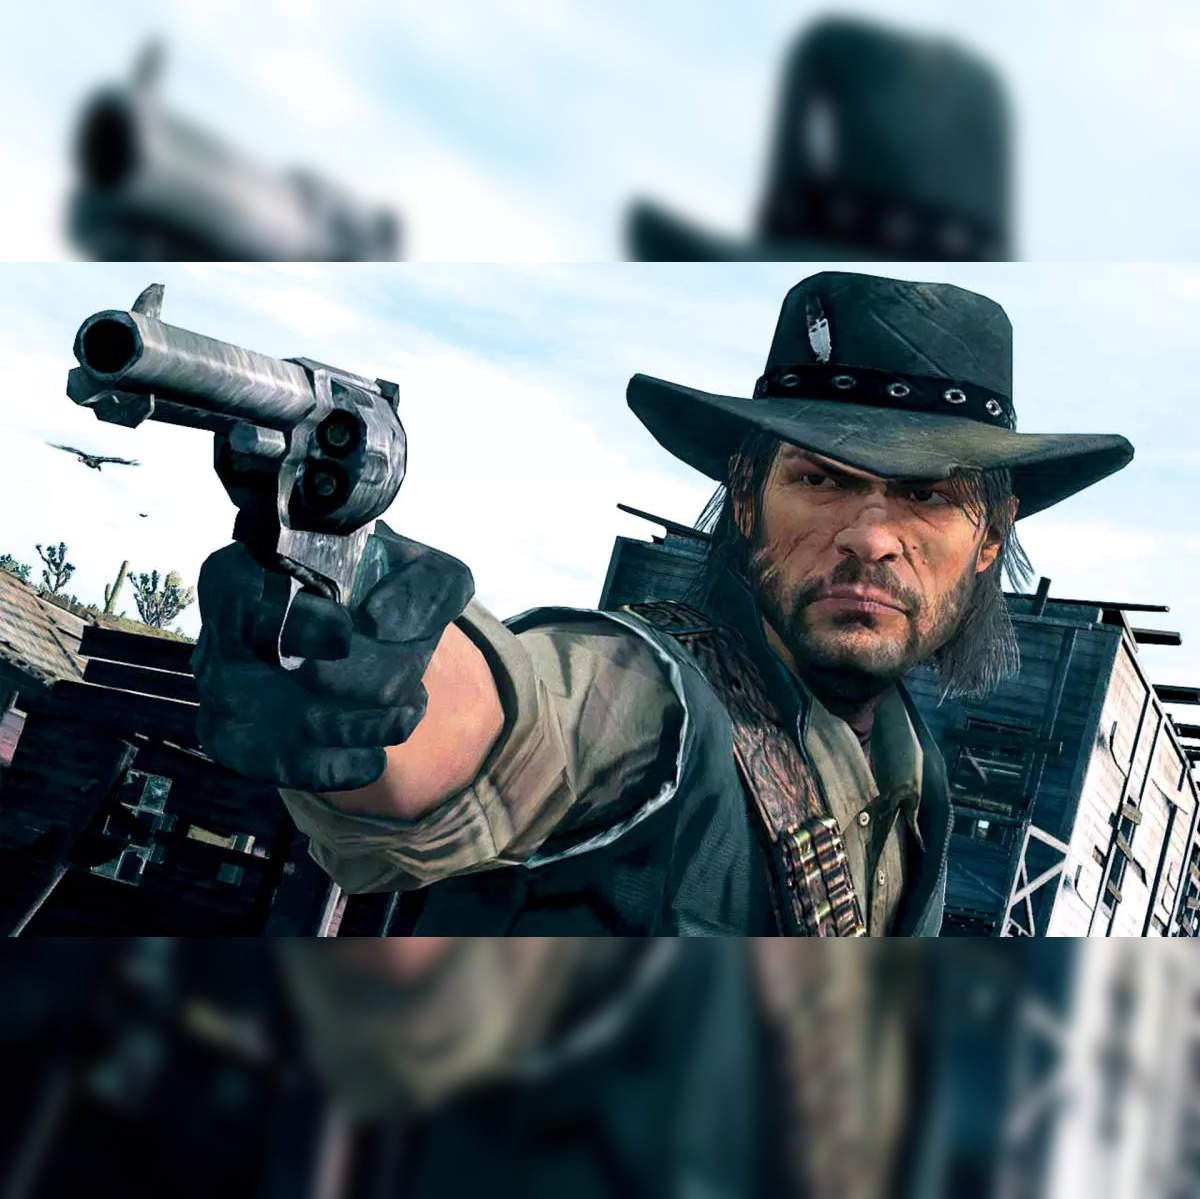 Report: Rockstar Canceled Red Dead Redemption 2 PS5 & Xbox Series X